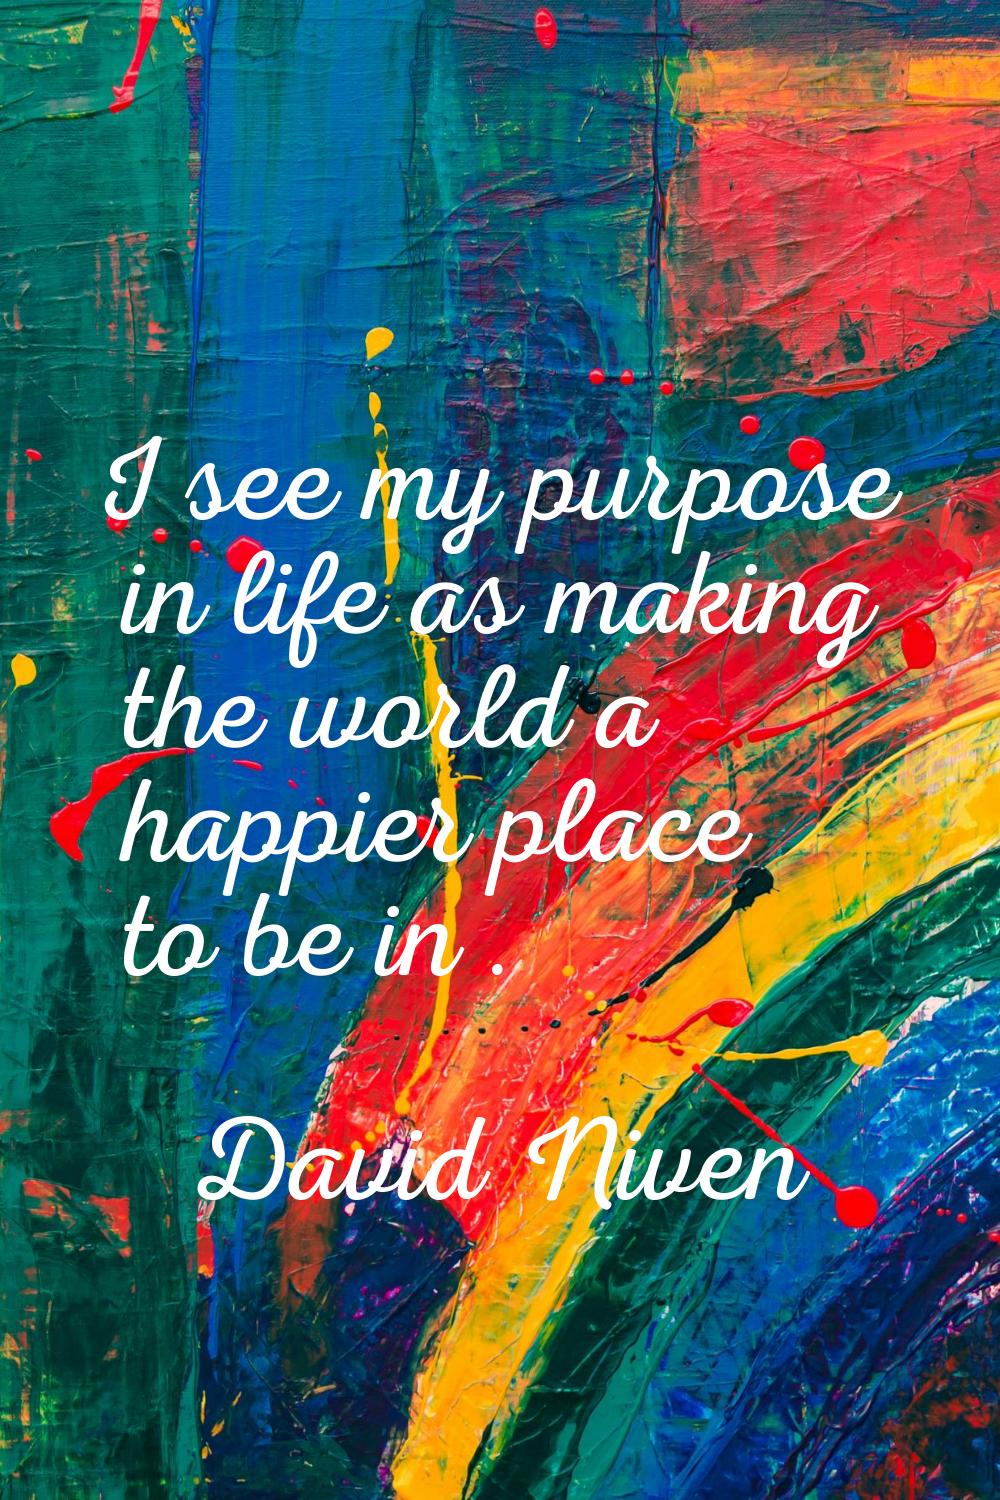 I see my purpose in life as making the world a happier place to be in .